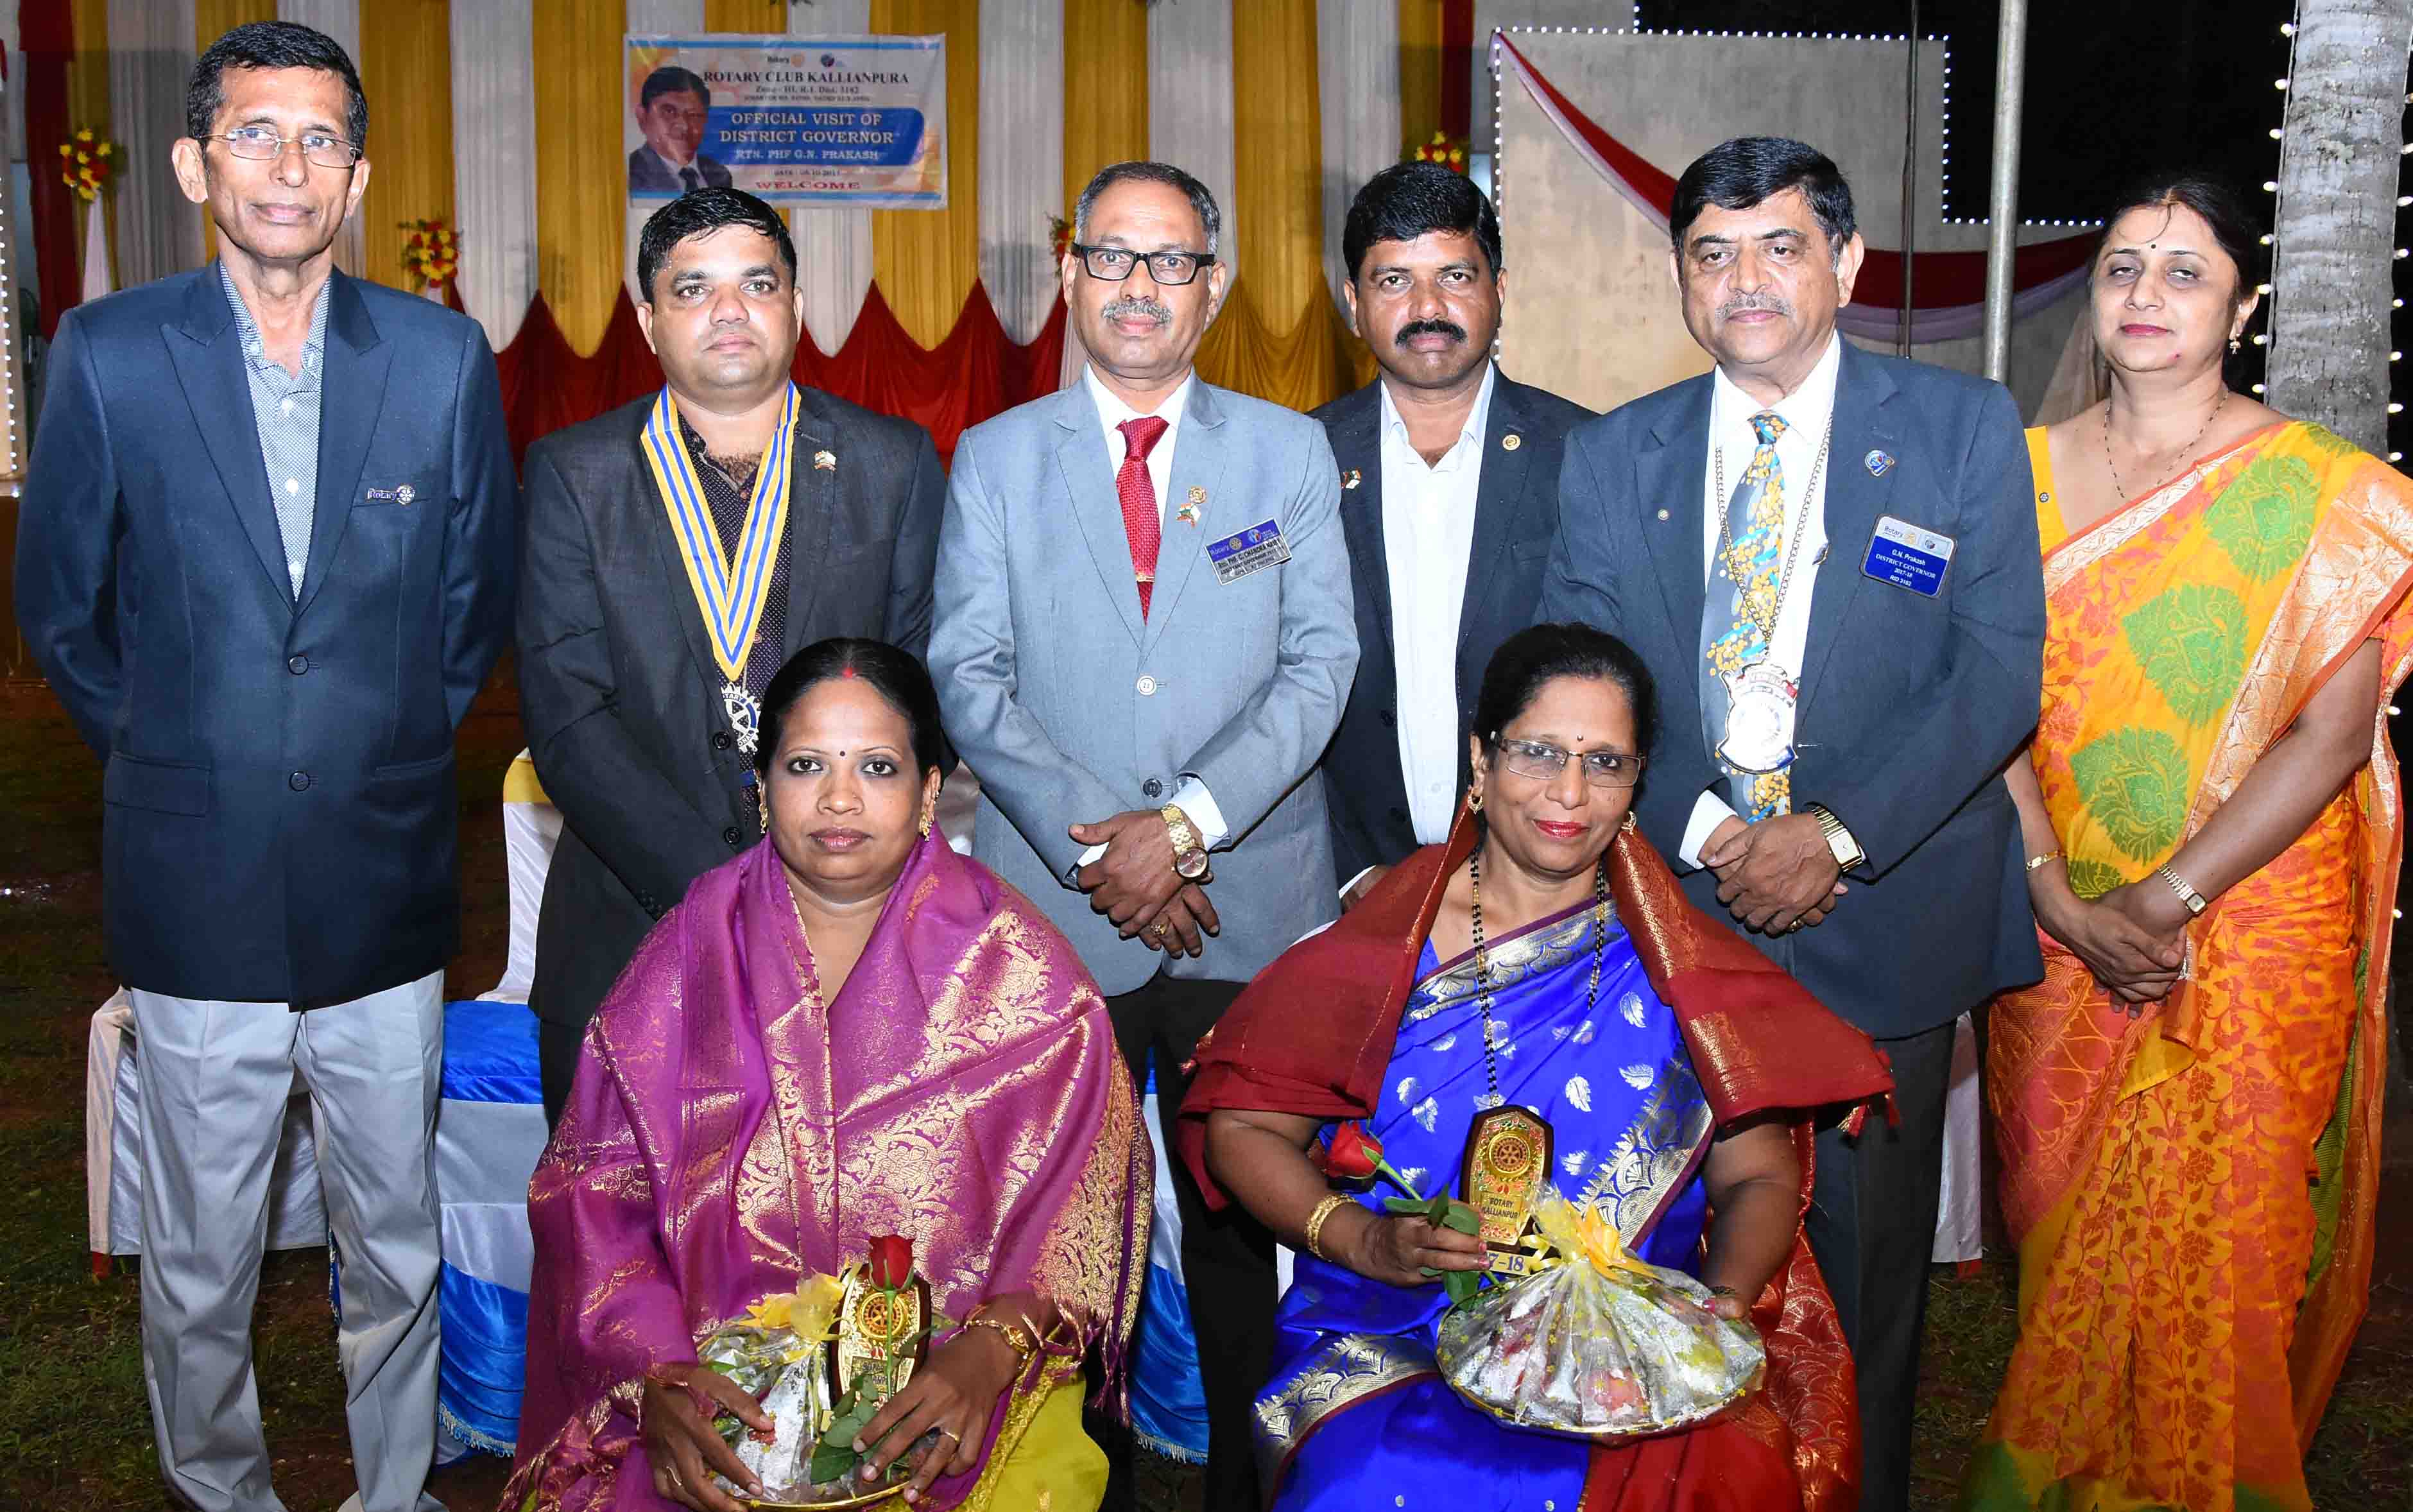 District Governor’s official visit to Rotary Club Kallianpur, honors award winner teachers